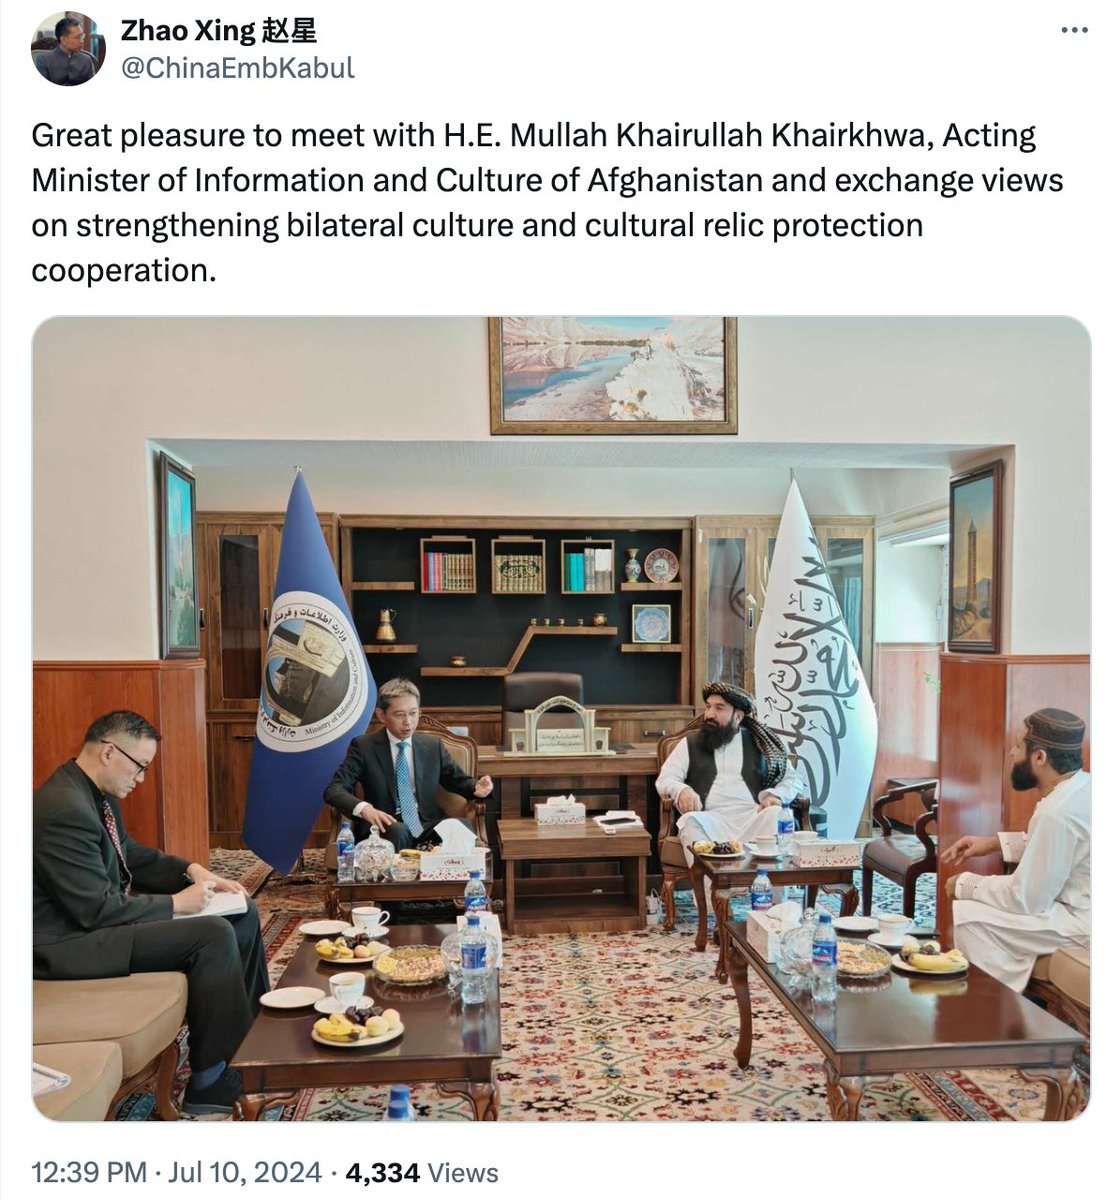 China's Ambassador Zhao Xing met with Mullah Khairullah Khairkhwa, the Taliban government's Minister of Information and Culture, and exchanged views on strengthening bilateral culture and cultural relic protection cooperation